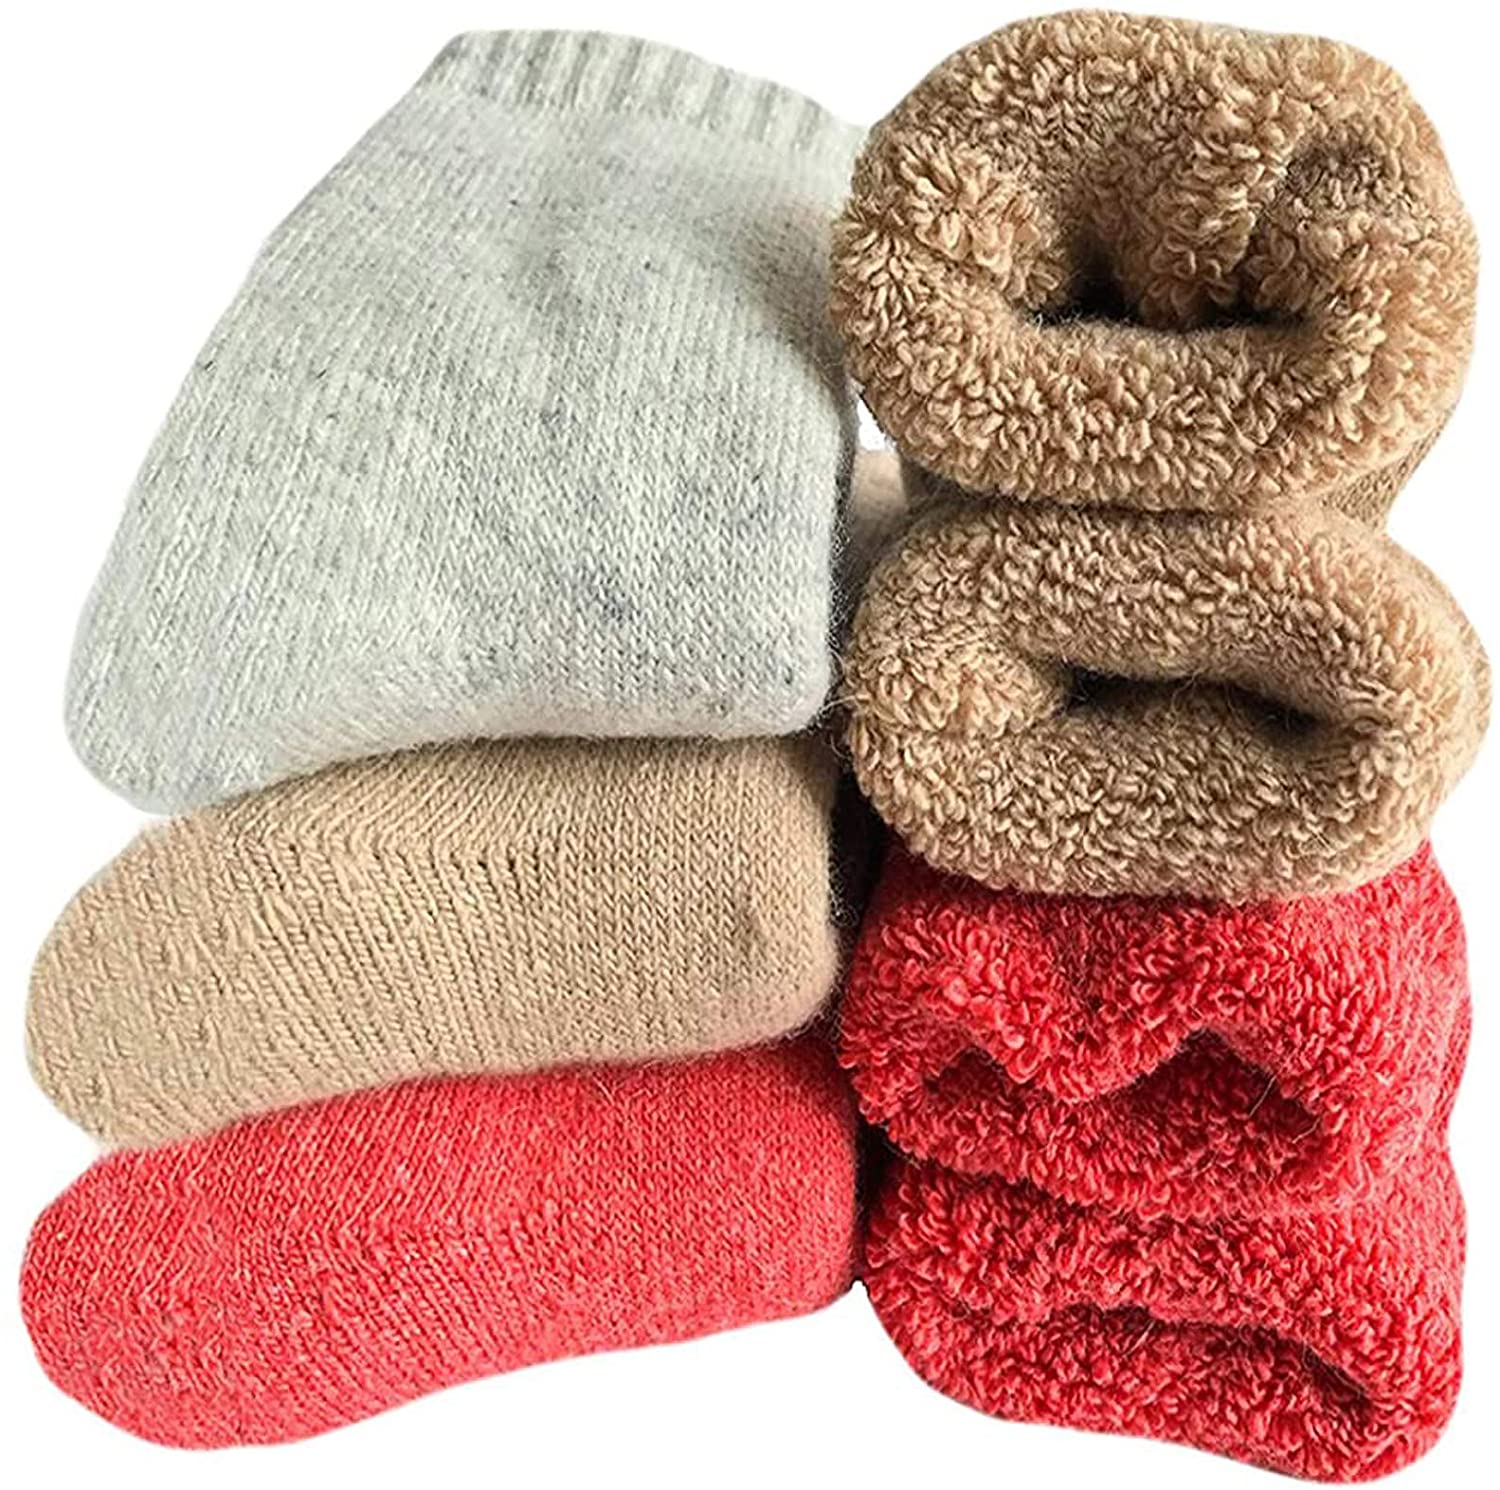 Yoicy Multicolor Super Thick Wool Warm Socks, 3-Pack